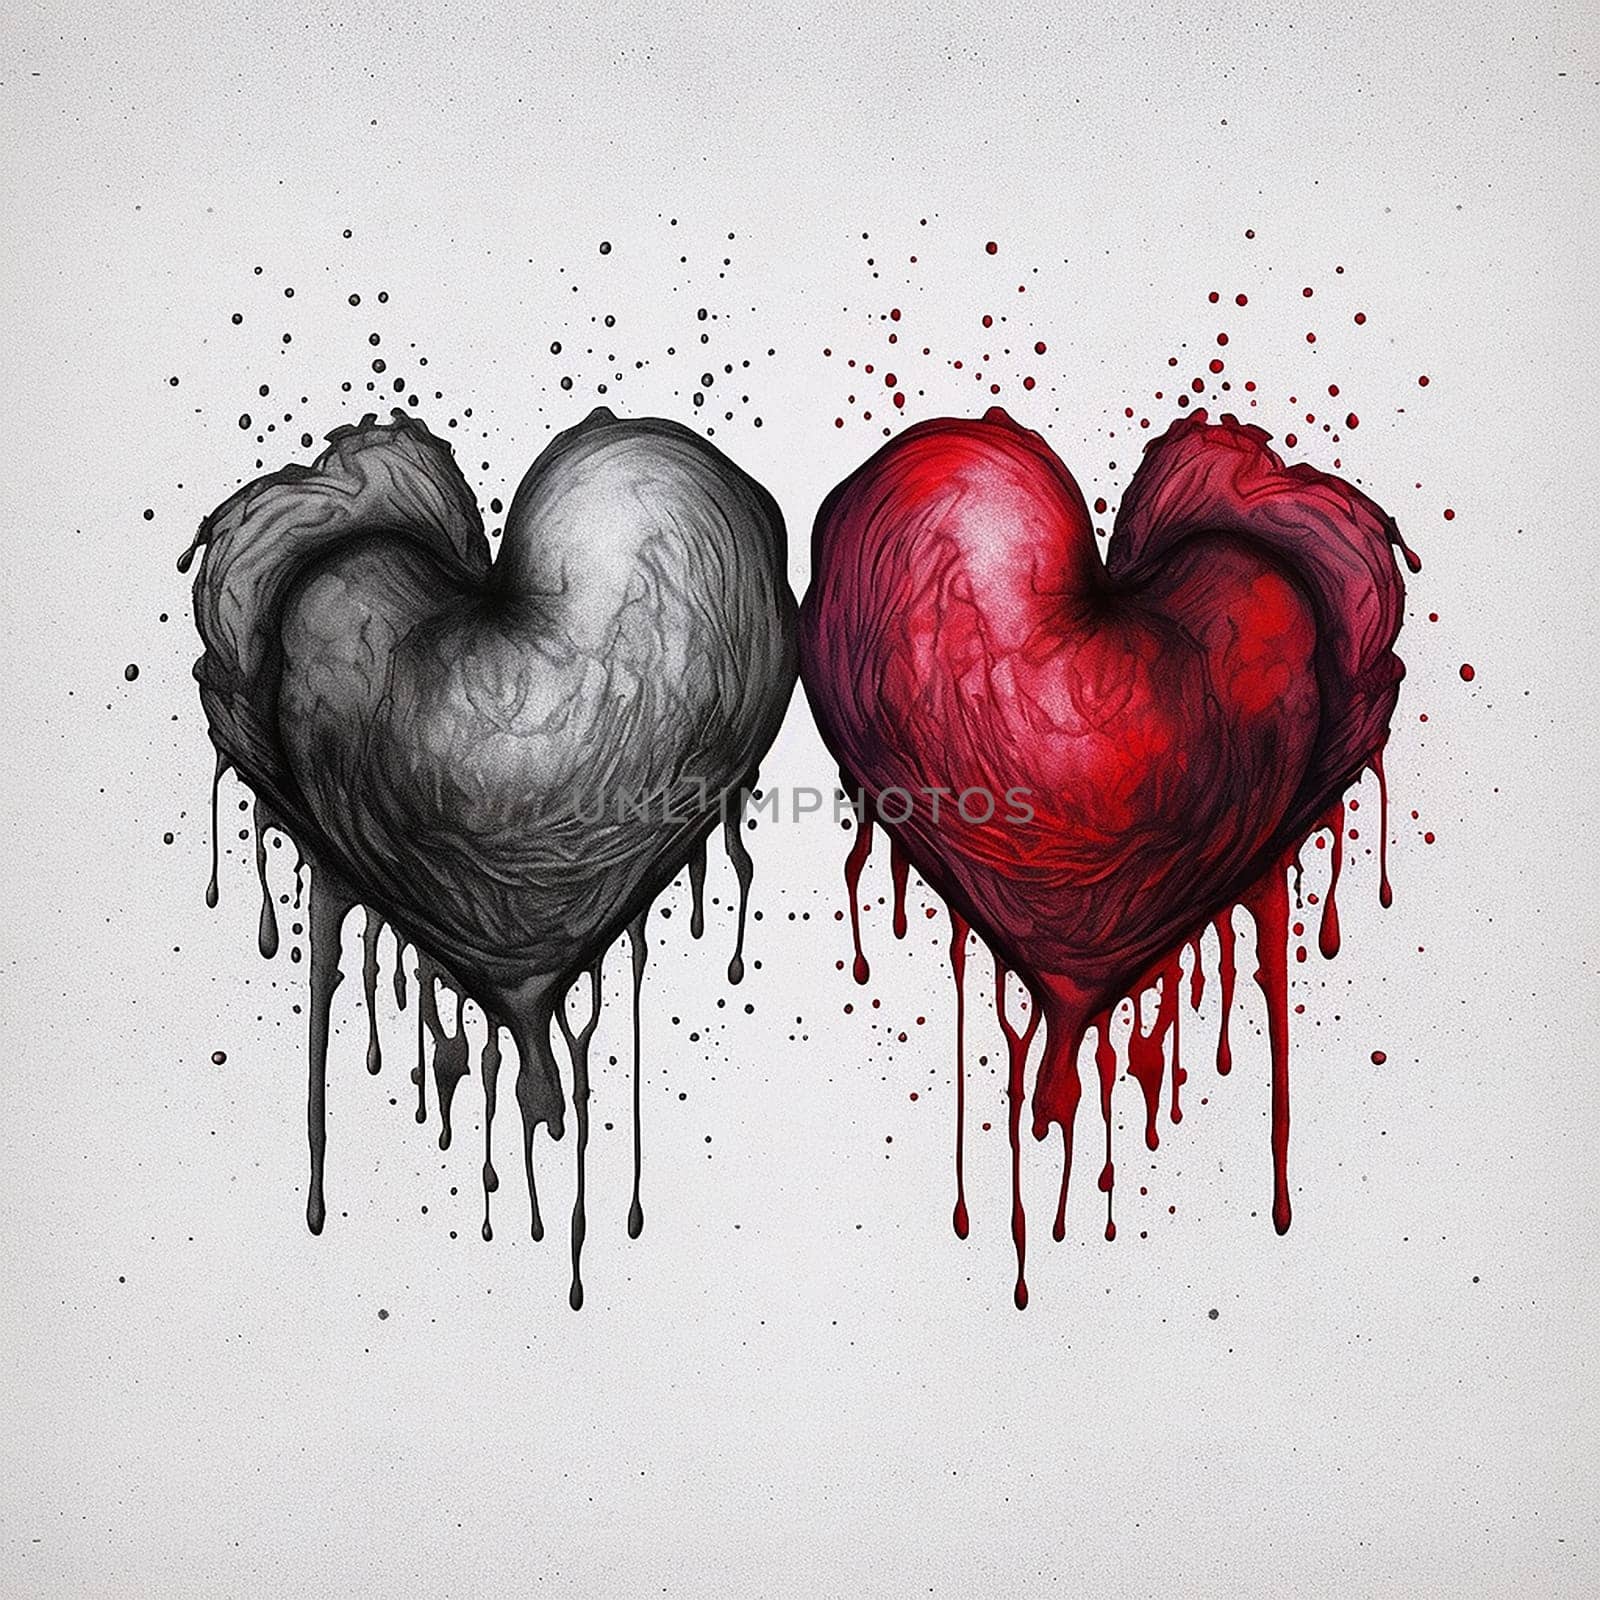 Two heart shapes, one black and one red, with a dripping paint effect